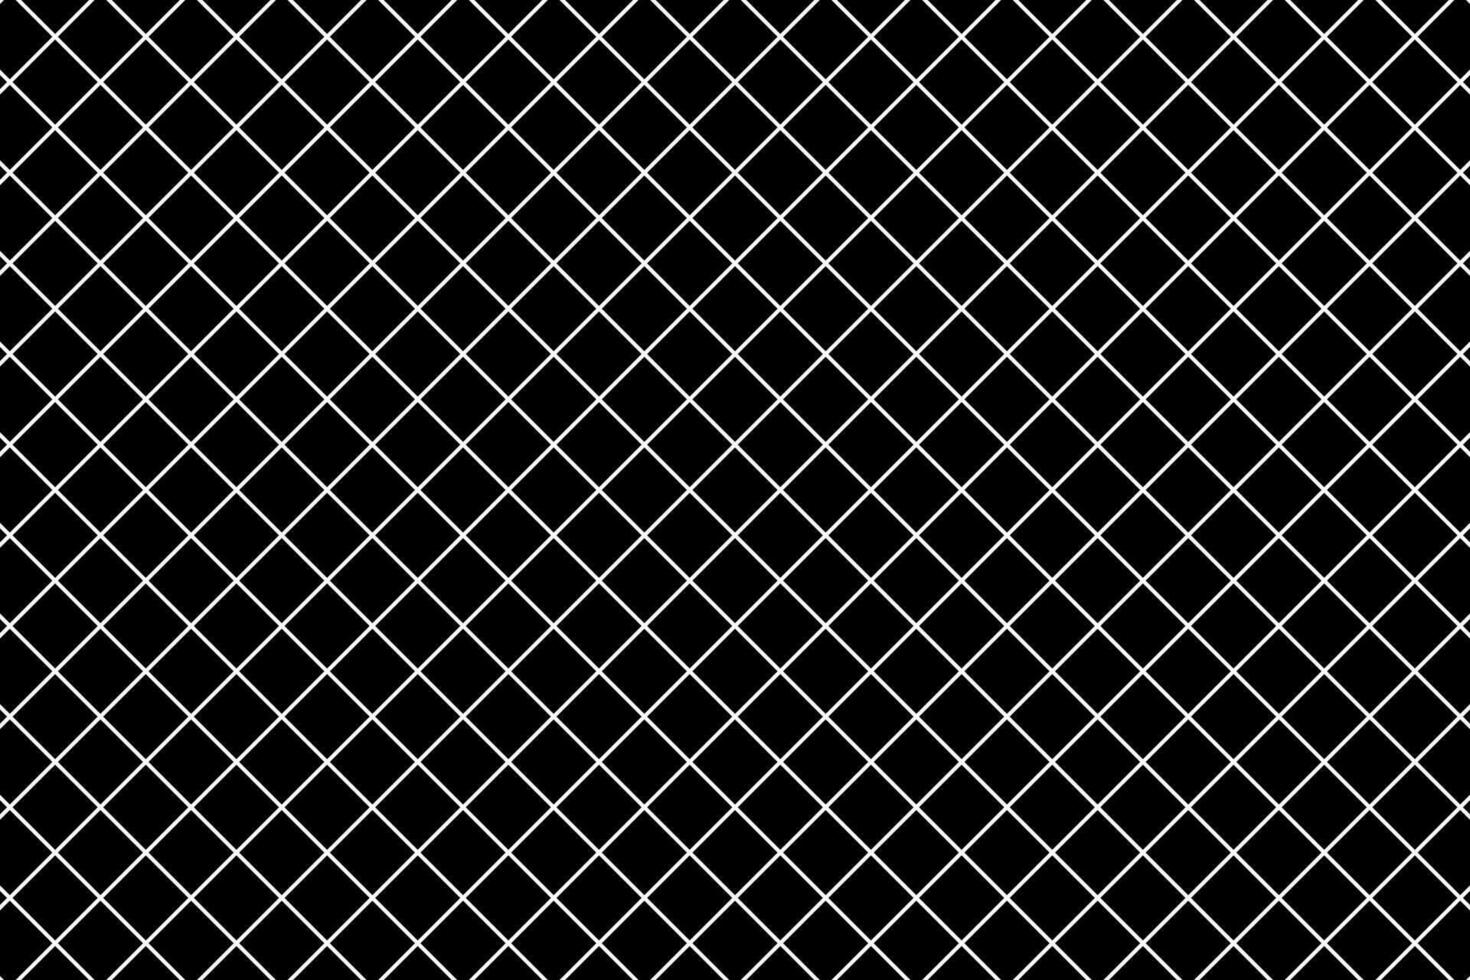 Black and white outline rhombus square grid pattern vector